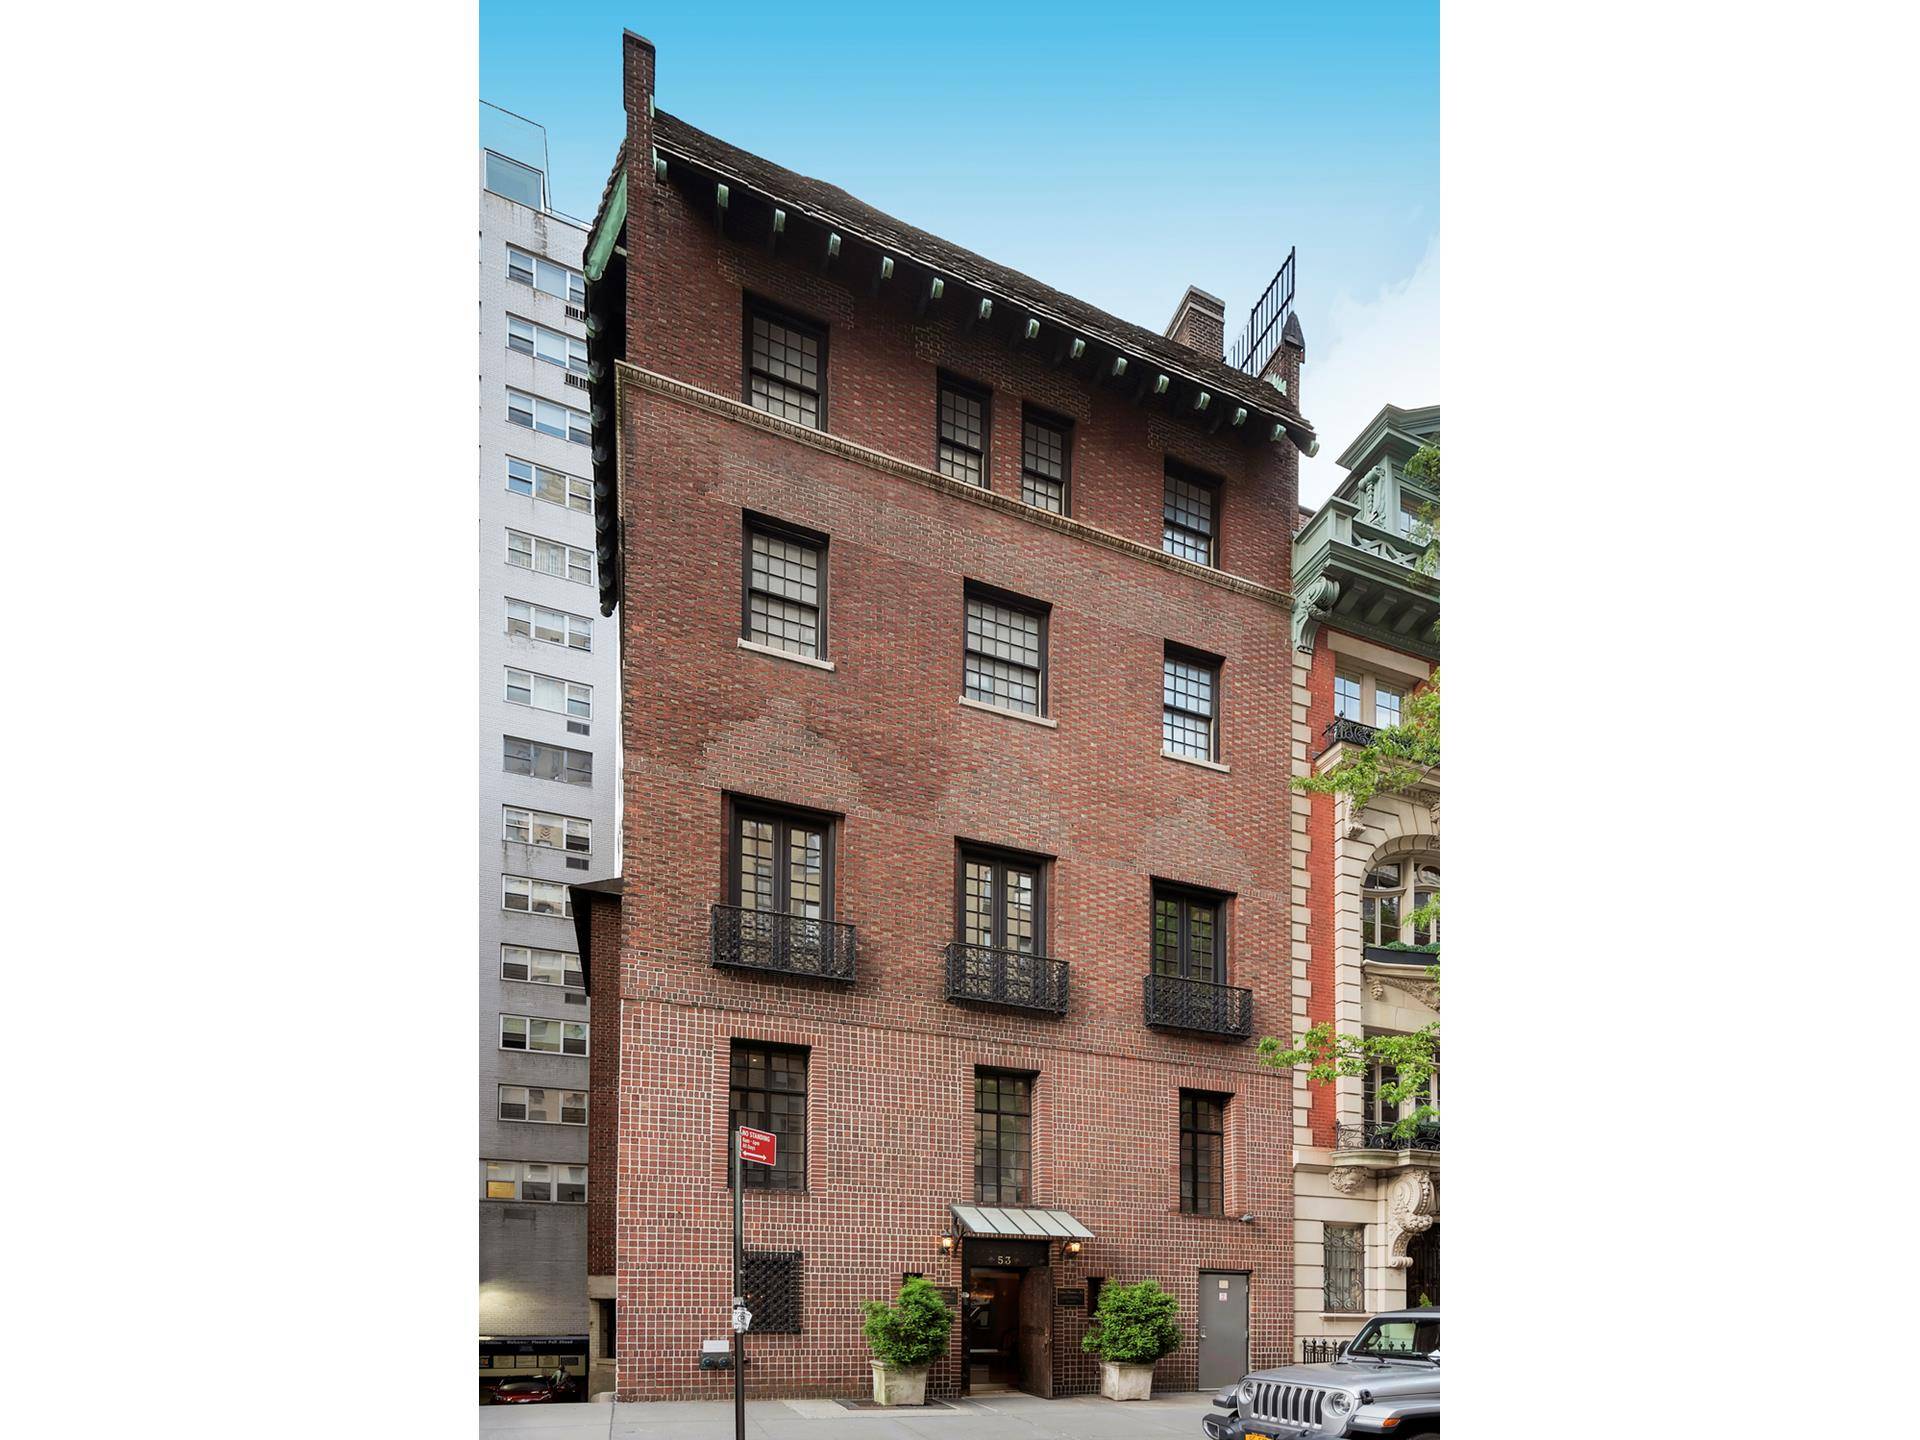 53 East 77th Street has gone through many permutation as a single family mansion, Funk and Wagnall's library, Cello restaurant, a recording studio and currently is used to market museum ...